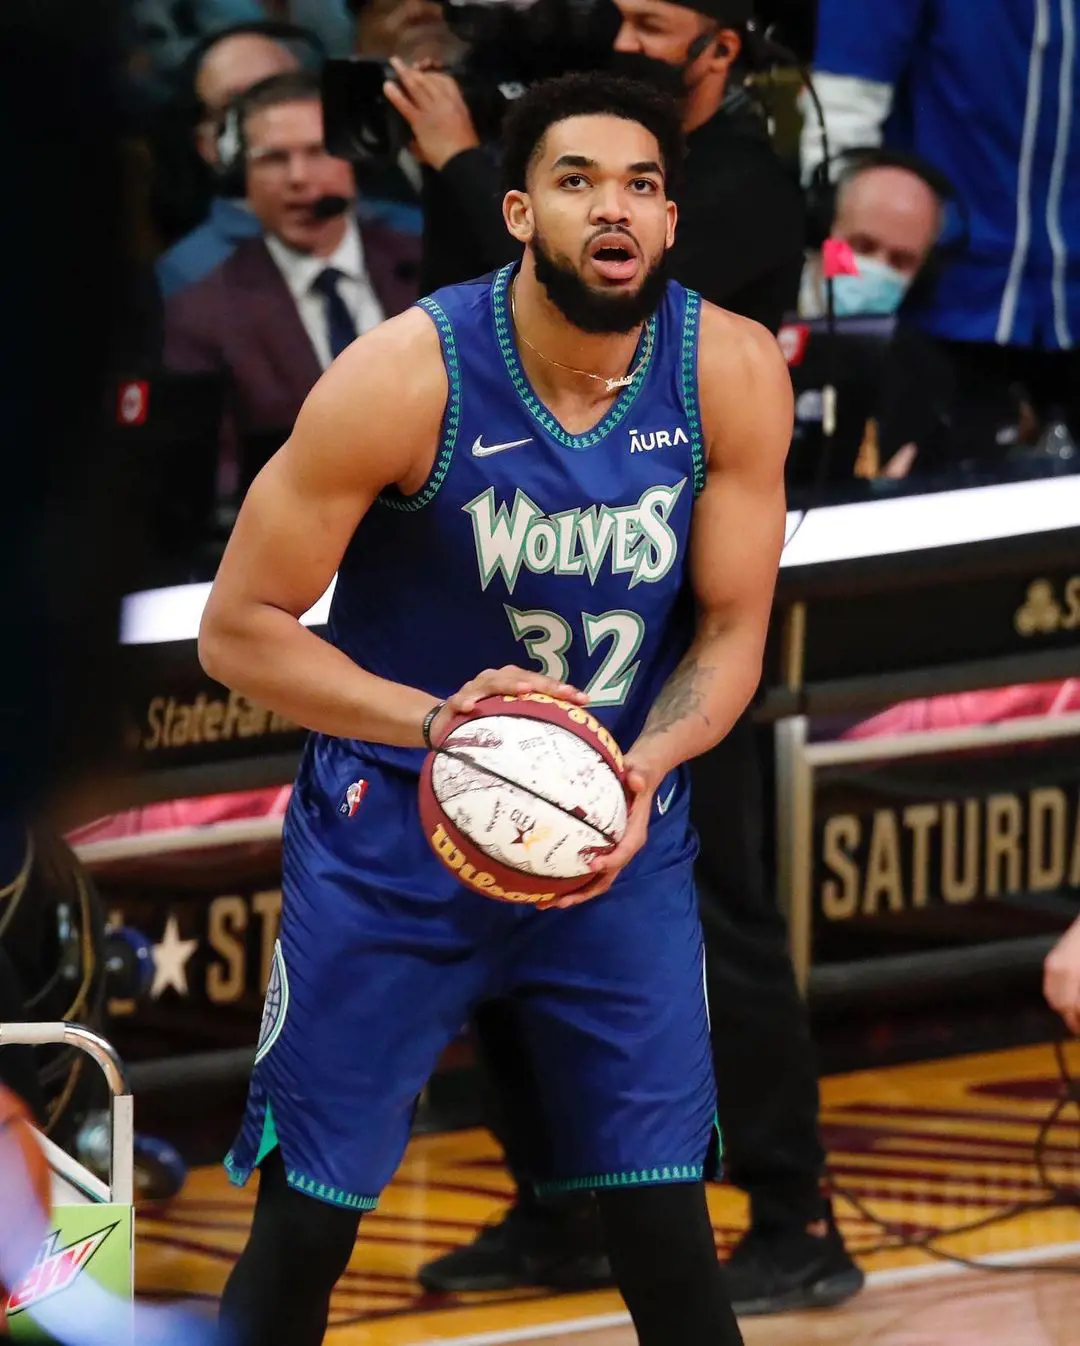 Karl-Anthony Towns balls for the Minnesota Timberwolves